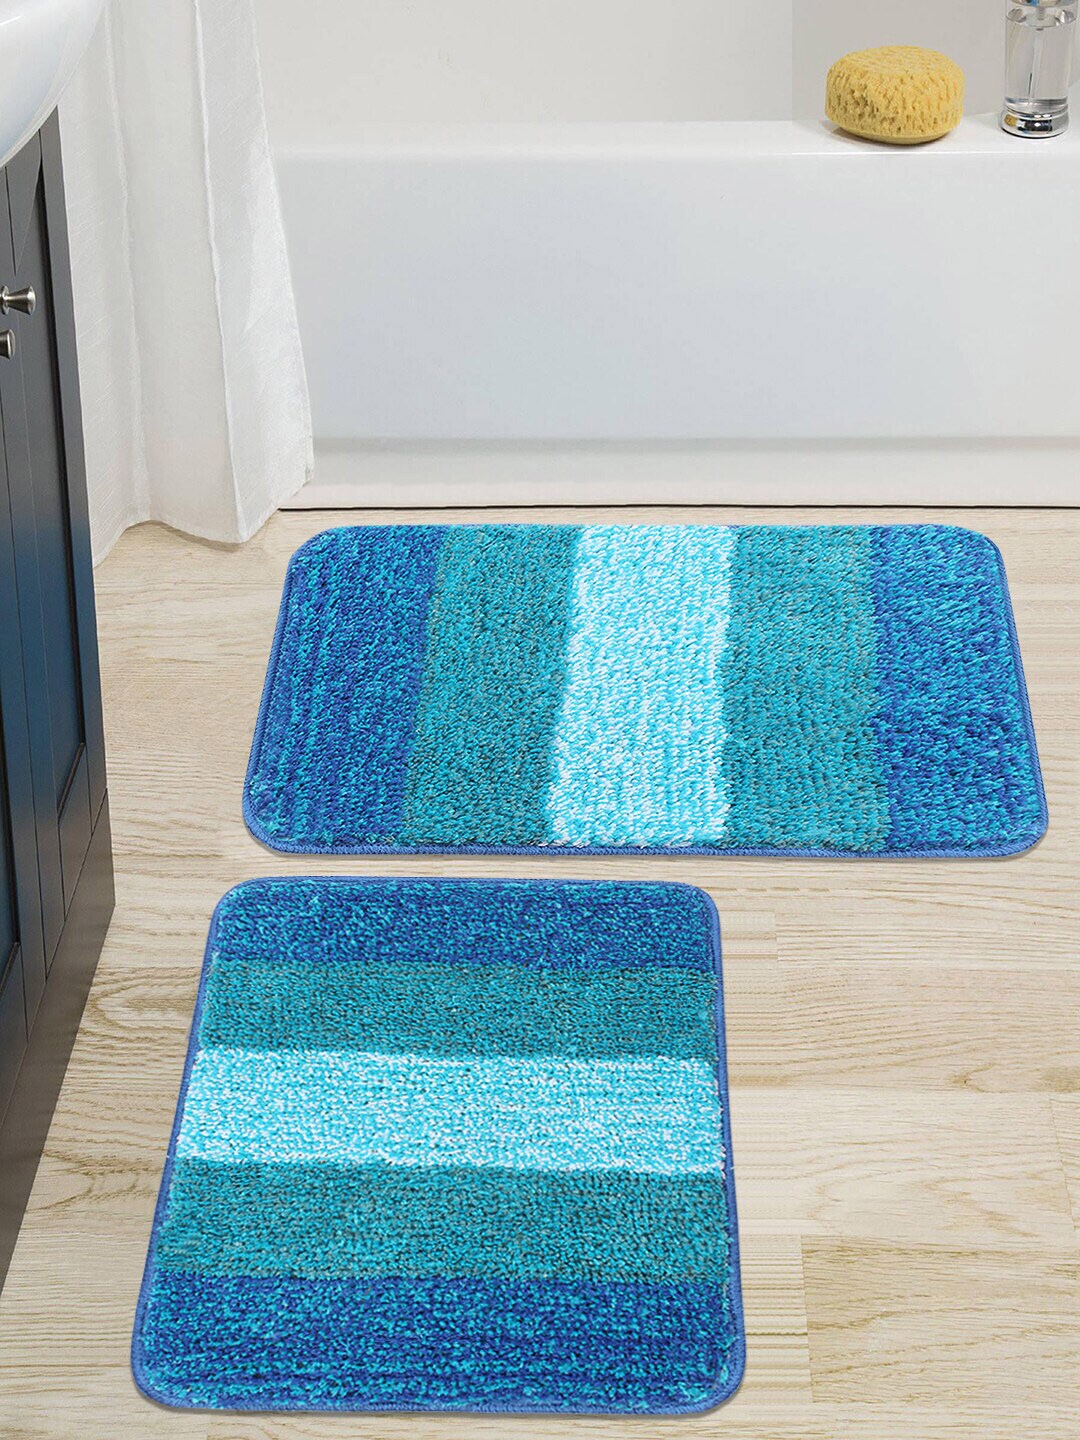 Saral Home Set Of 2 Turquoise Blue & Teal Blue Striped Anti-Skid Bath Mats Price in India